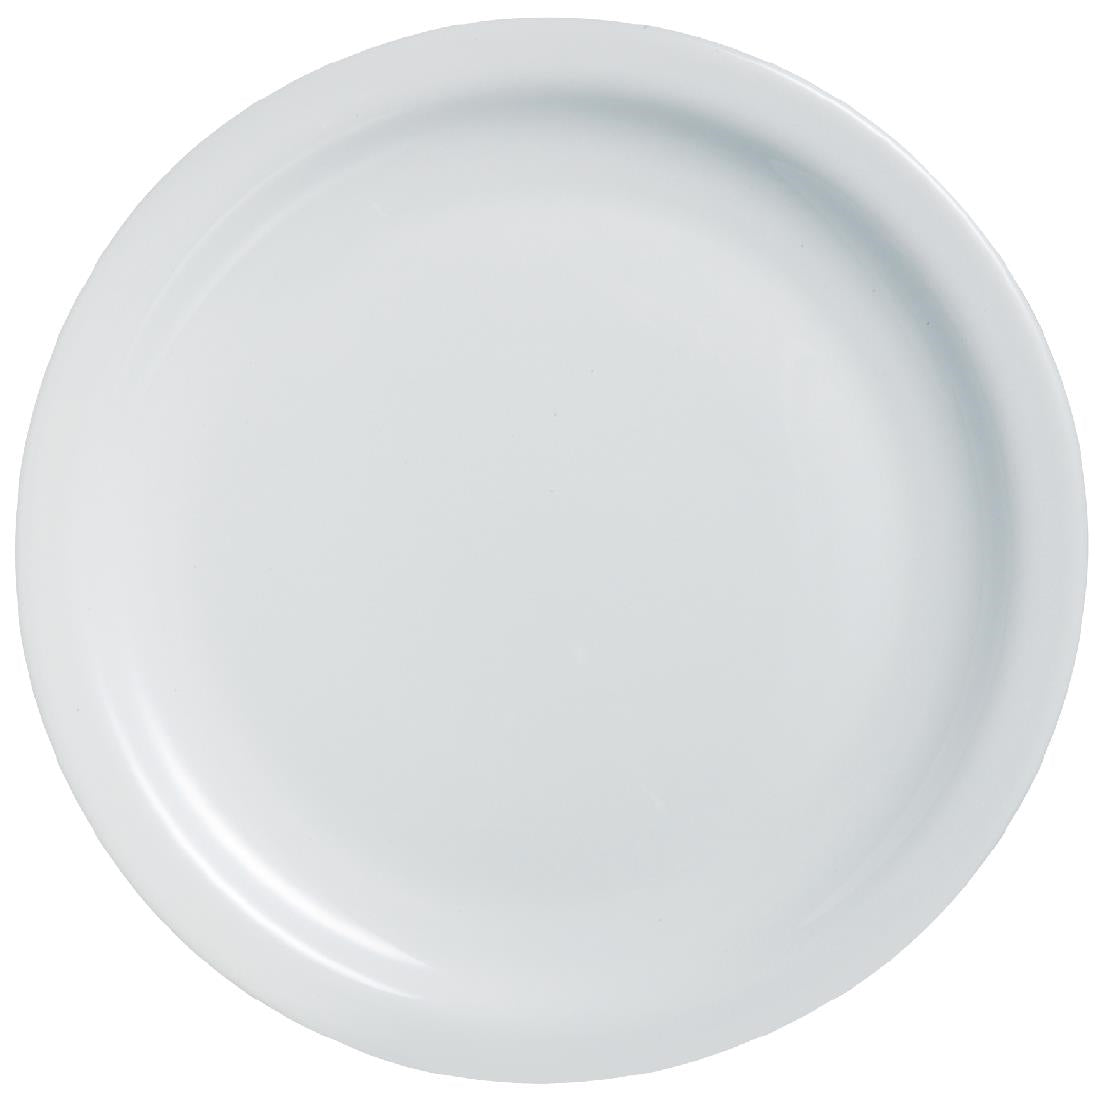 Arcoroc Opal Hoteliere Narrow Rim Plates 193mm (Pack of 6)